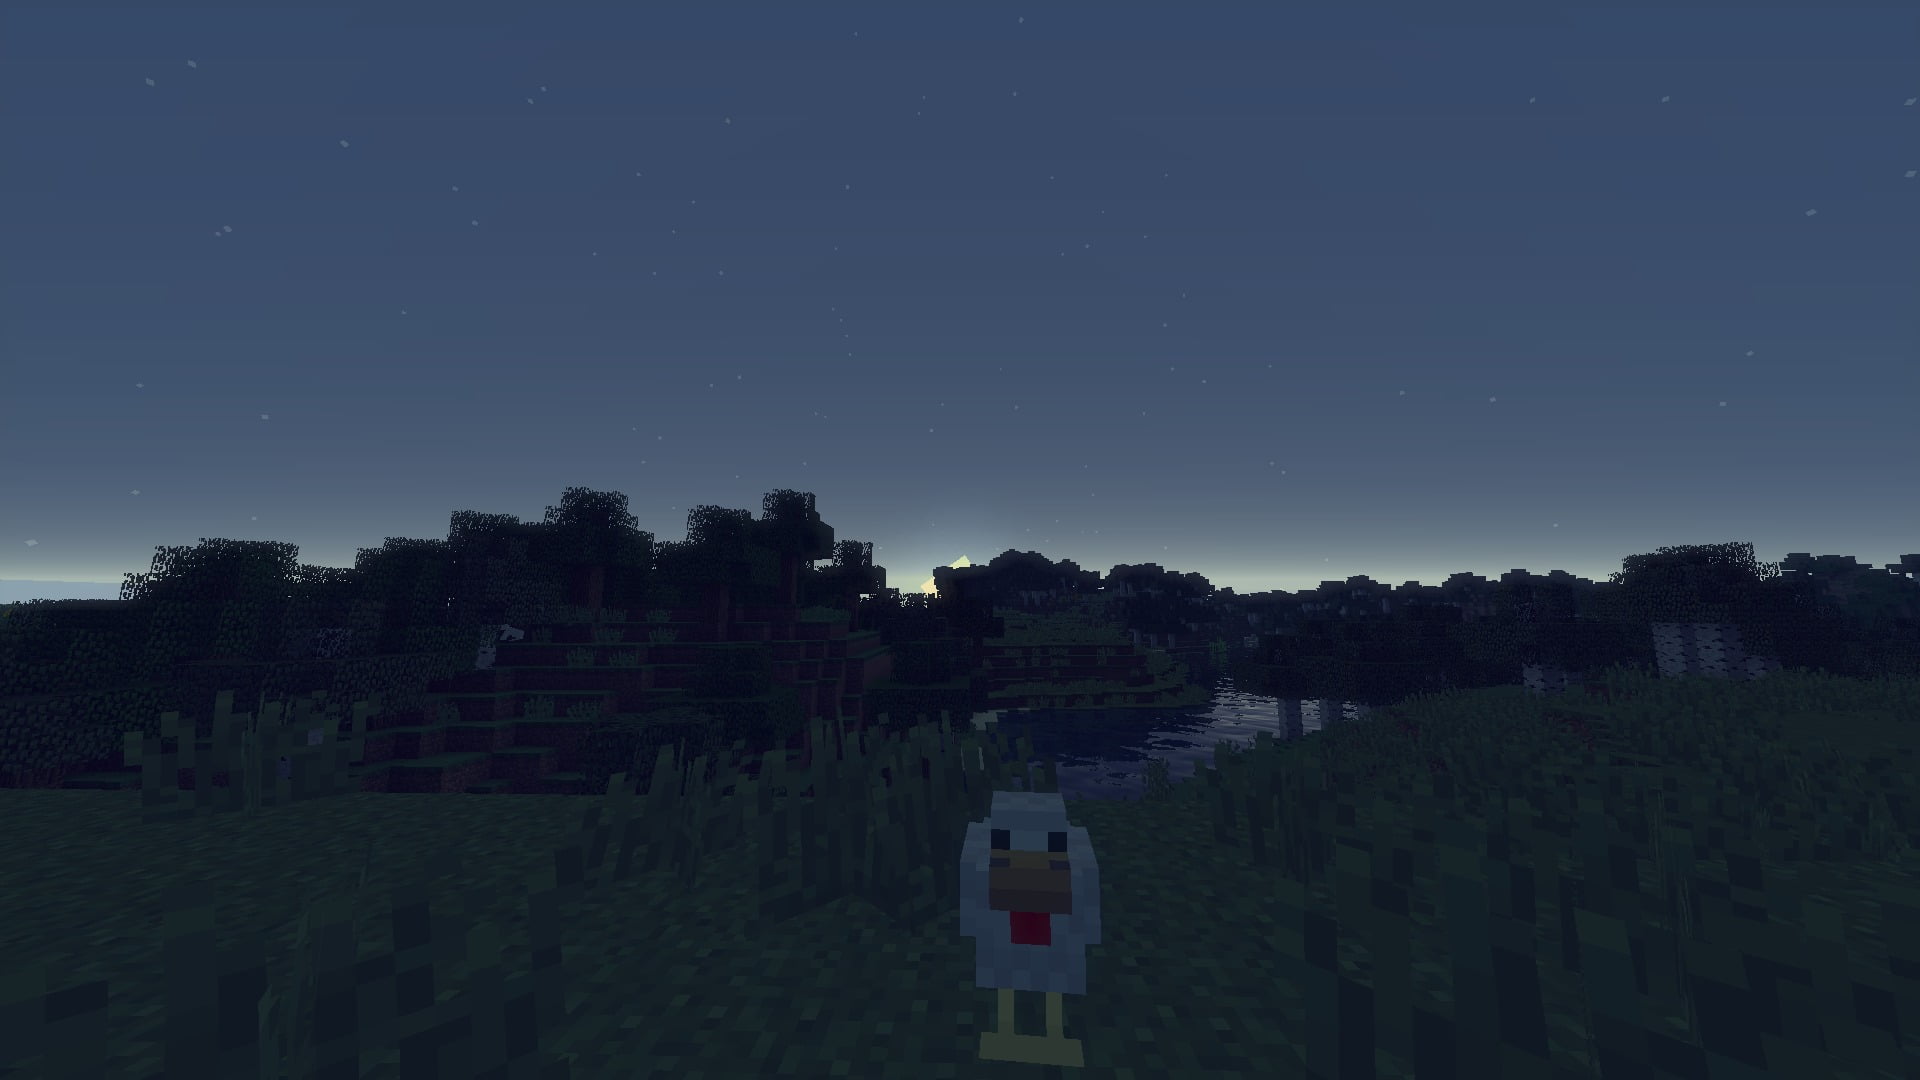 untitled, Minecraft, Sun, Moon, water, shaders, black, sky, star - space